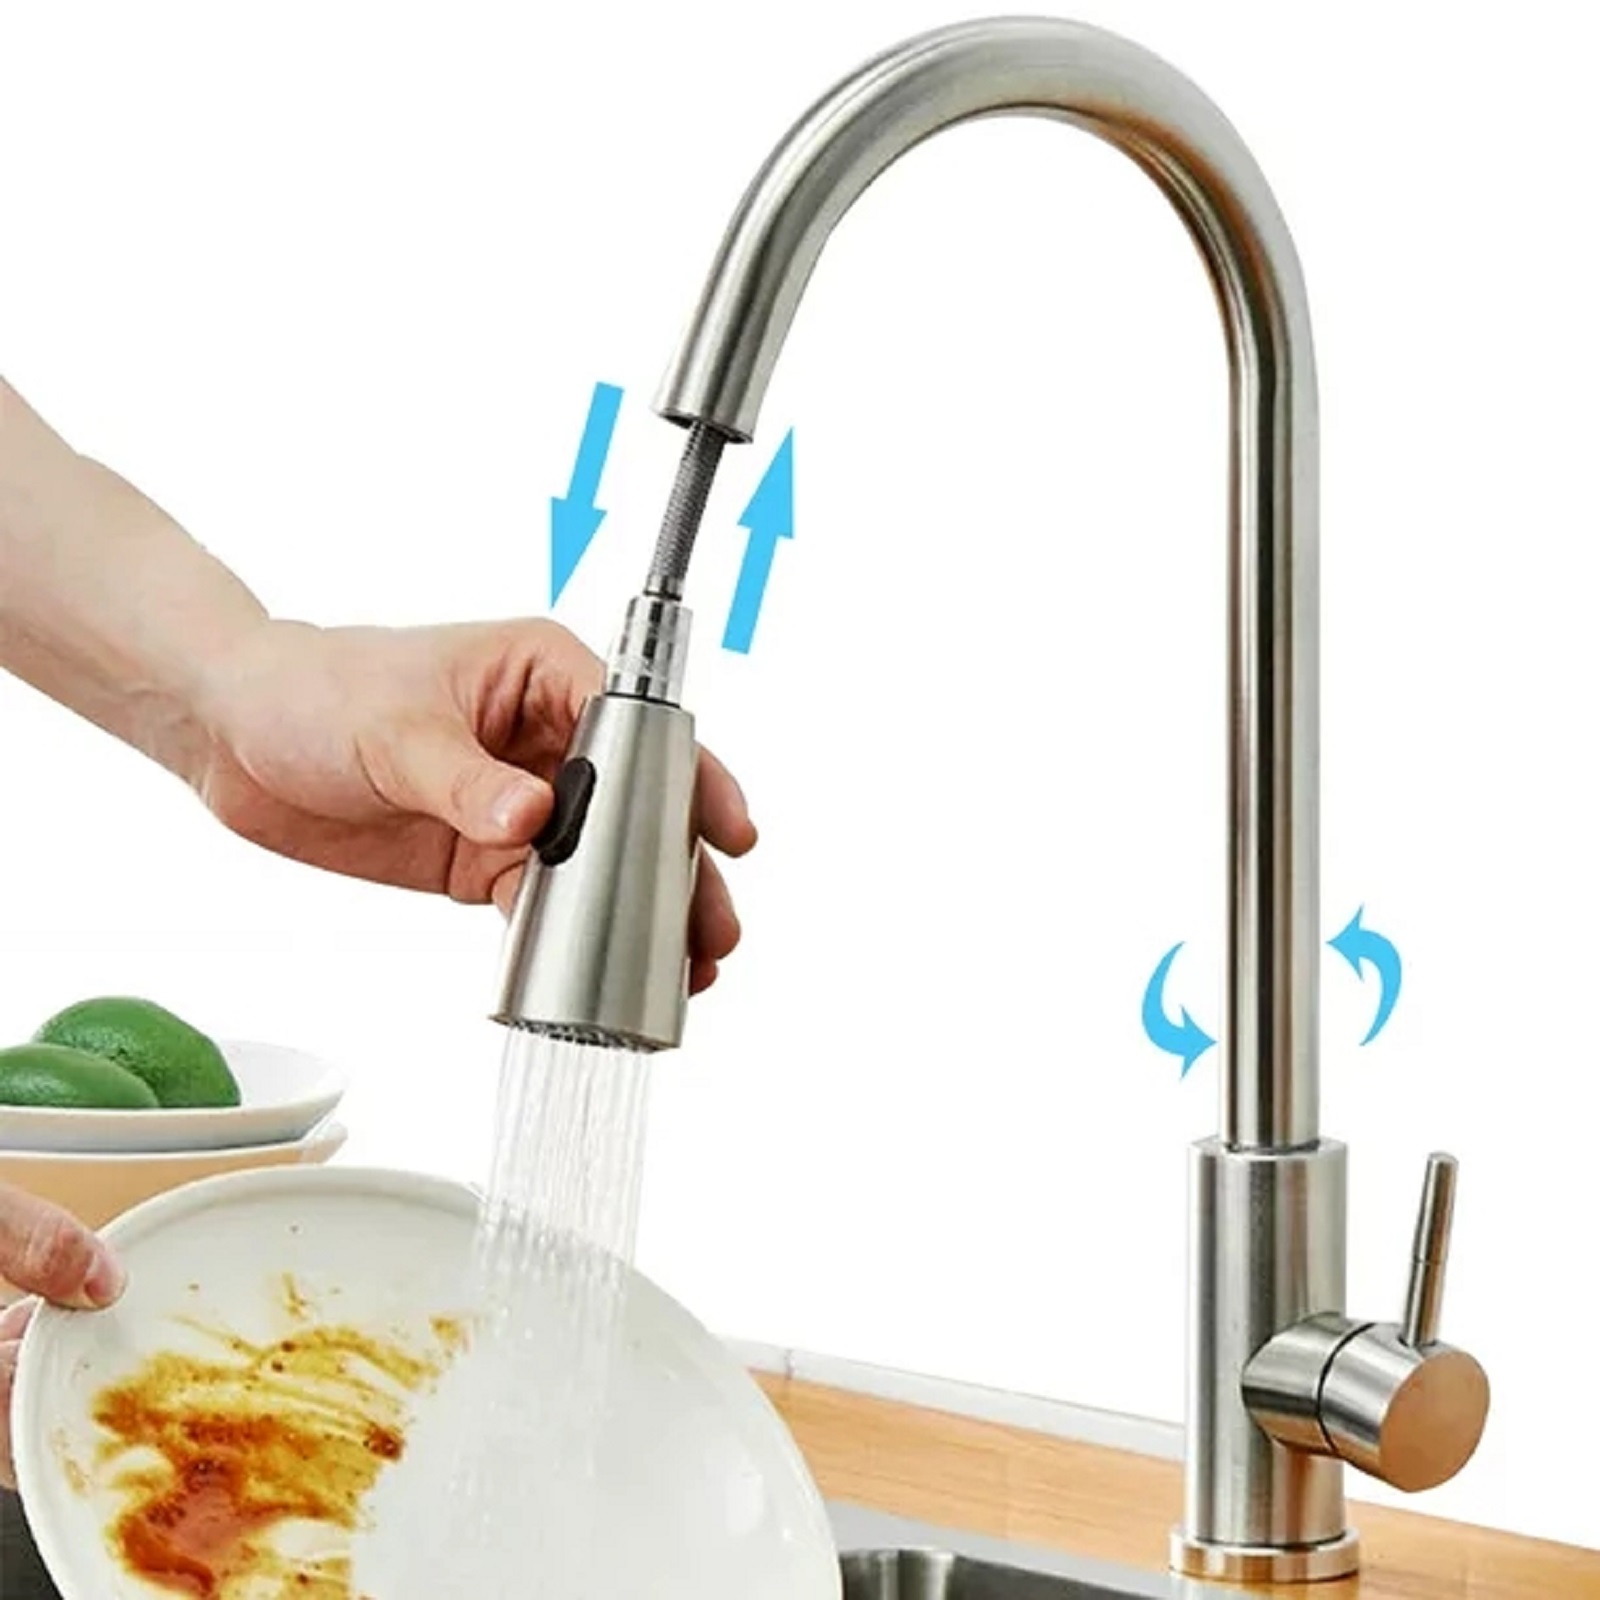 Kitchen Faucet,Kitchen Sink Faucet with Pull Down Sprayer,2 Models Single Handle Kitchen Bar Faucet w/ Water Lines Mixer Tap(fit 1/2" and 3/8") - image 1 of 7